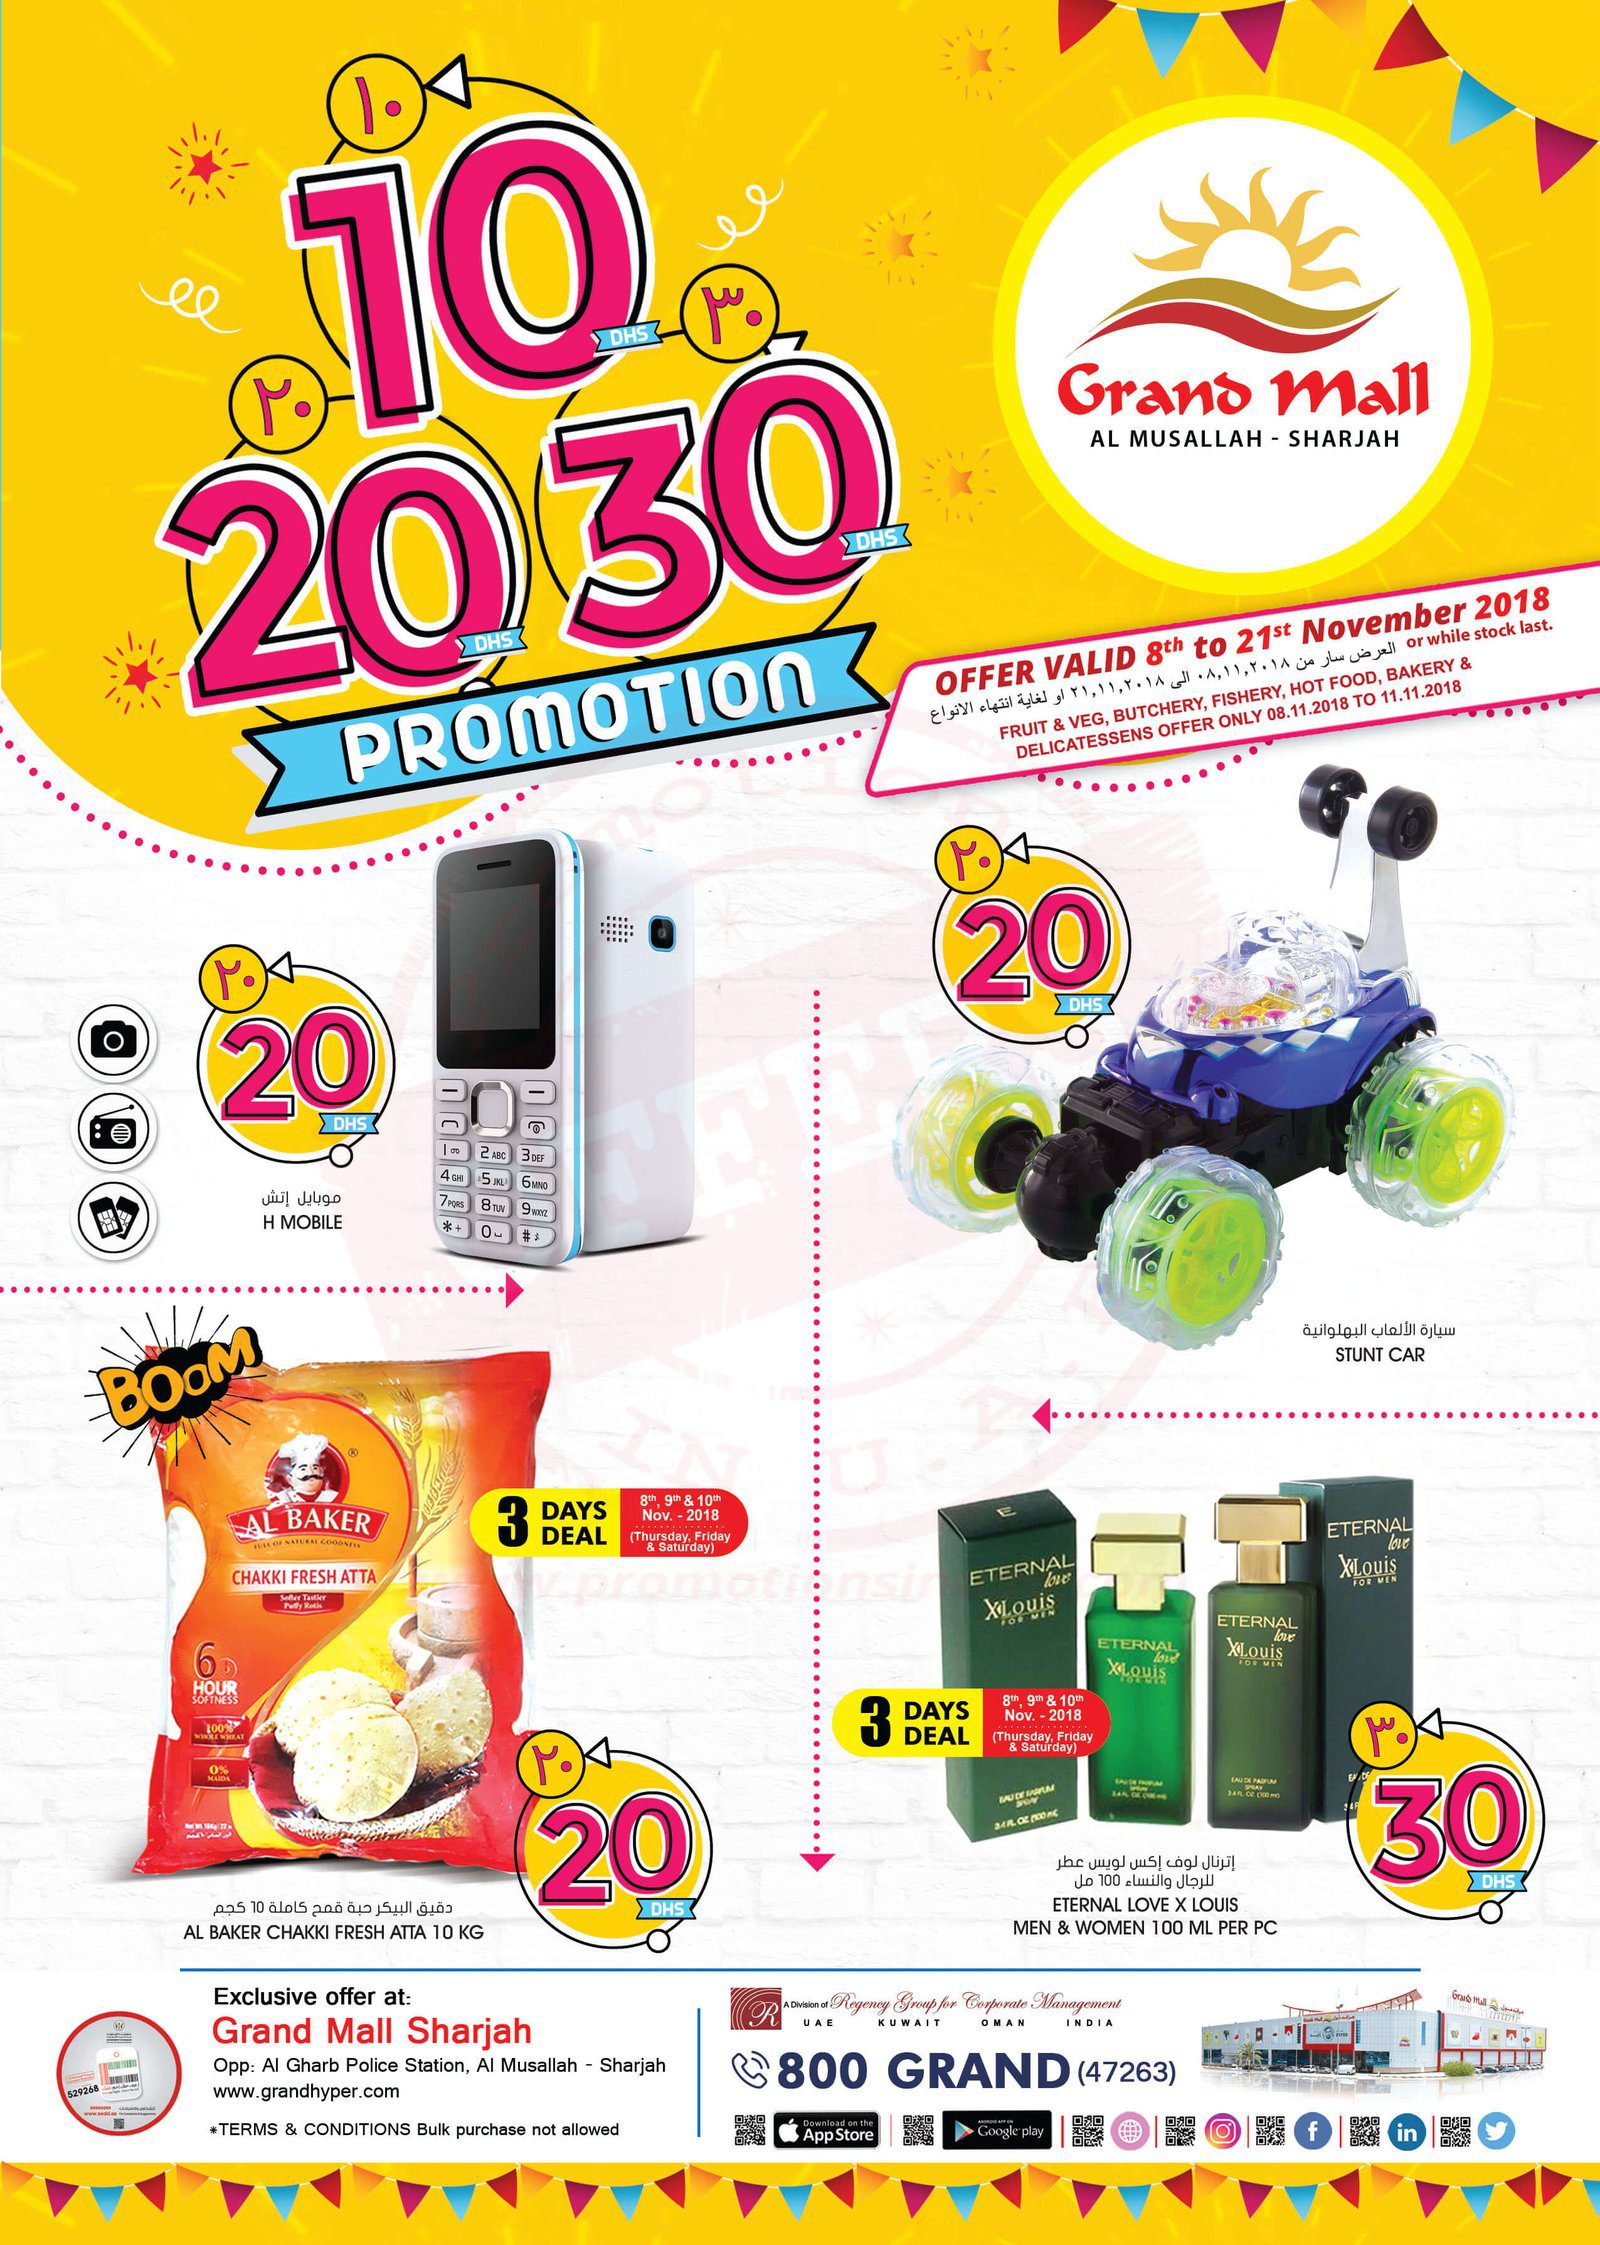 Grand Mall Sharjah 10, 20, 30 DHS Offer